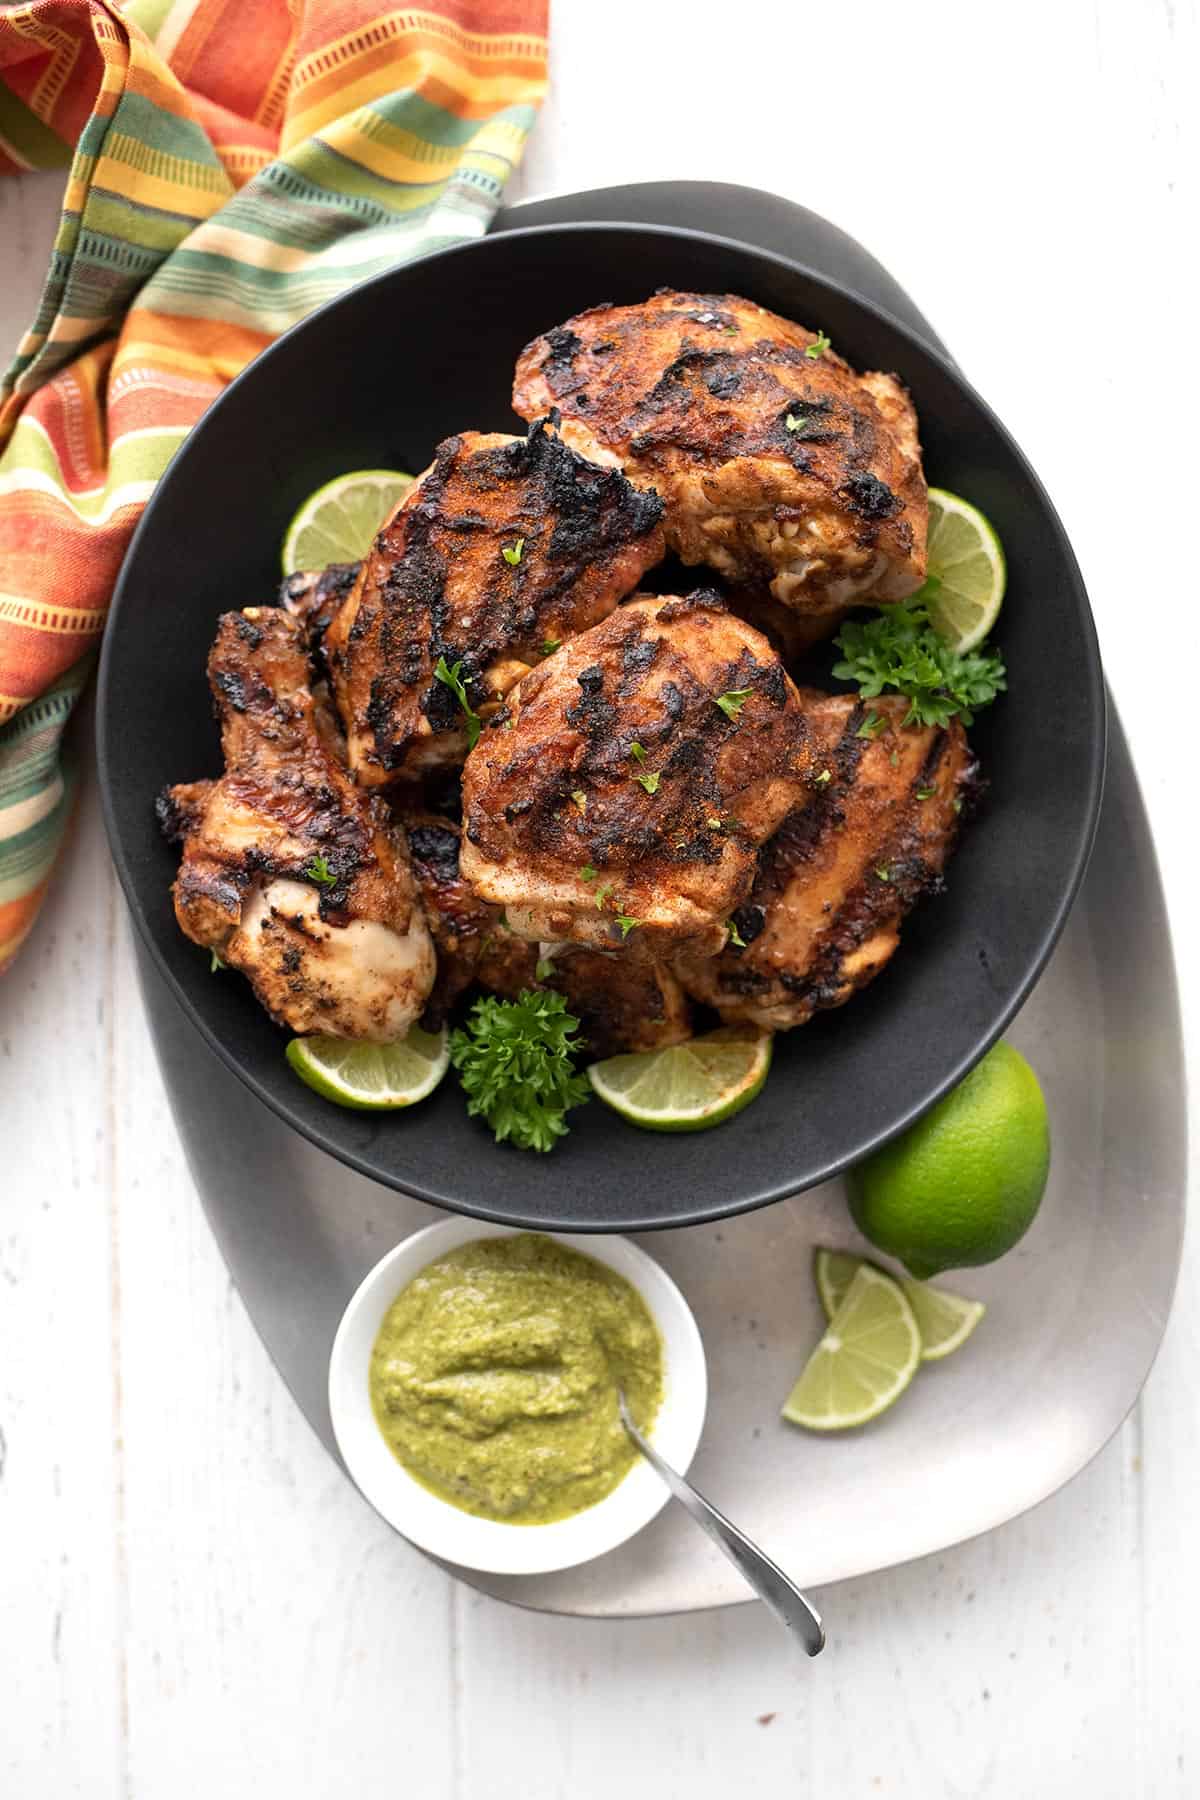 Top down image of a metal tray with Peruvian chicken and cilantro sauce.